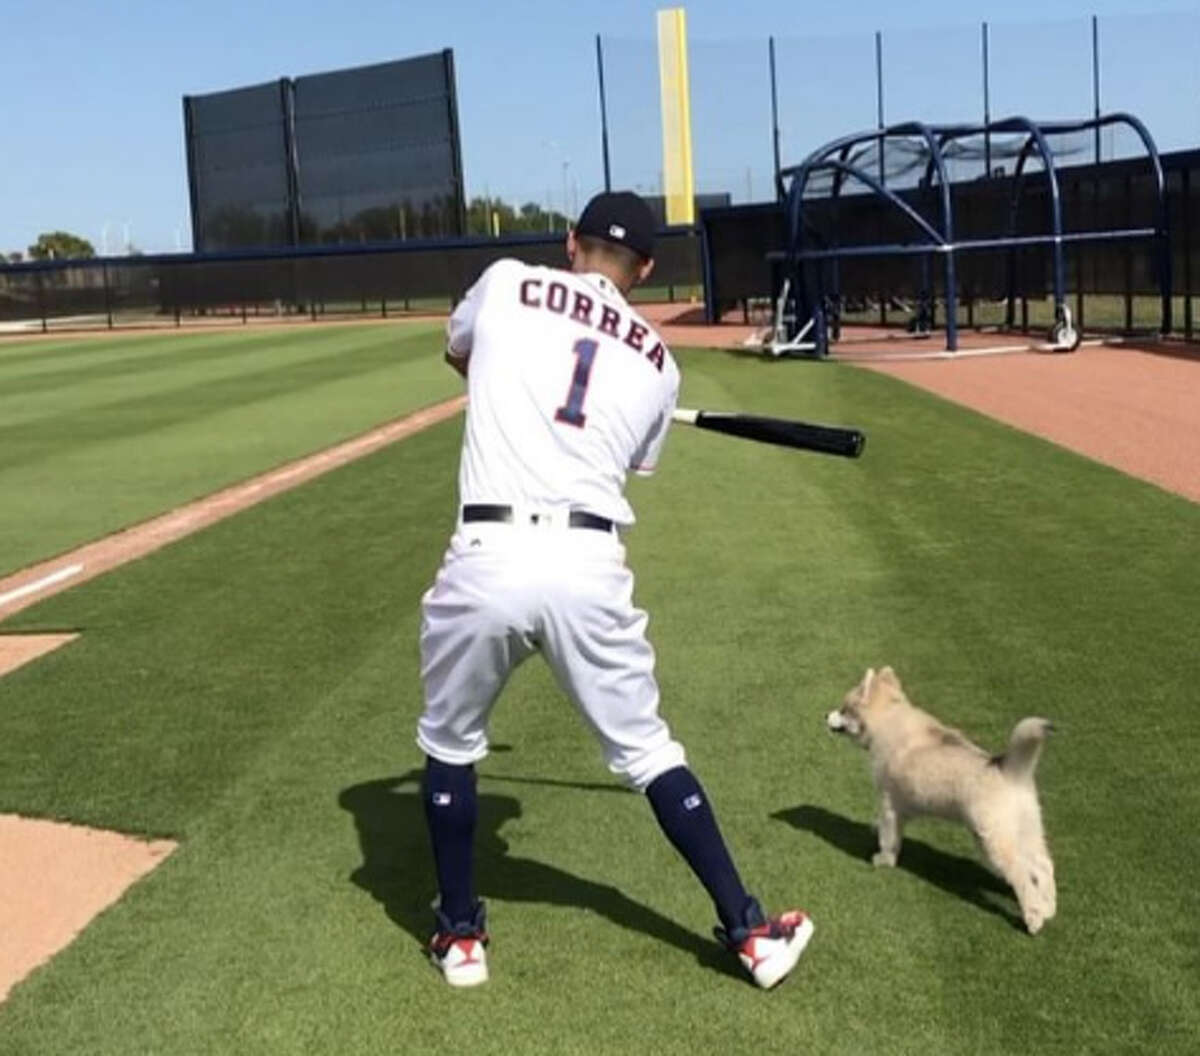 Carlos Correa doing some fielding practice with his puppy, Groot